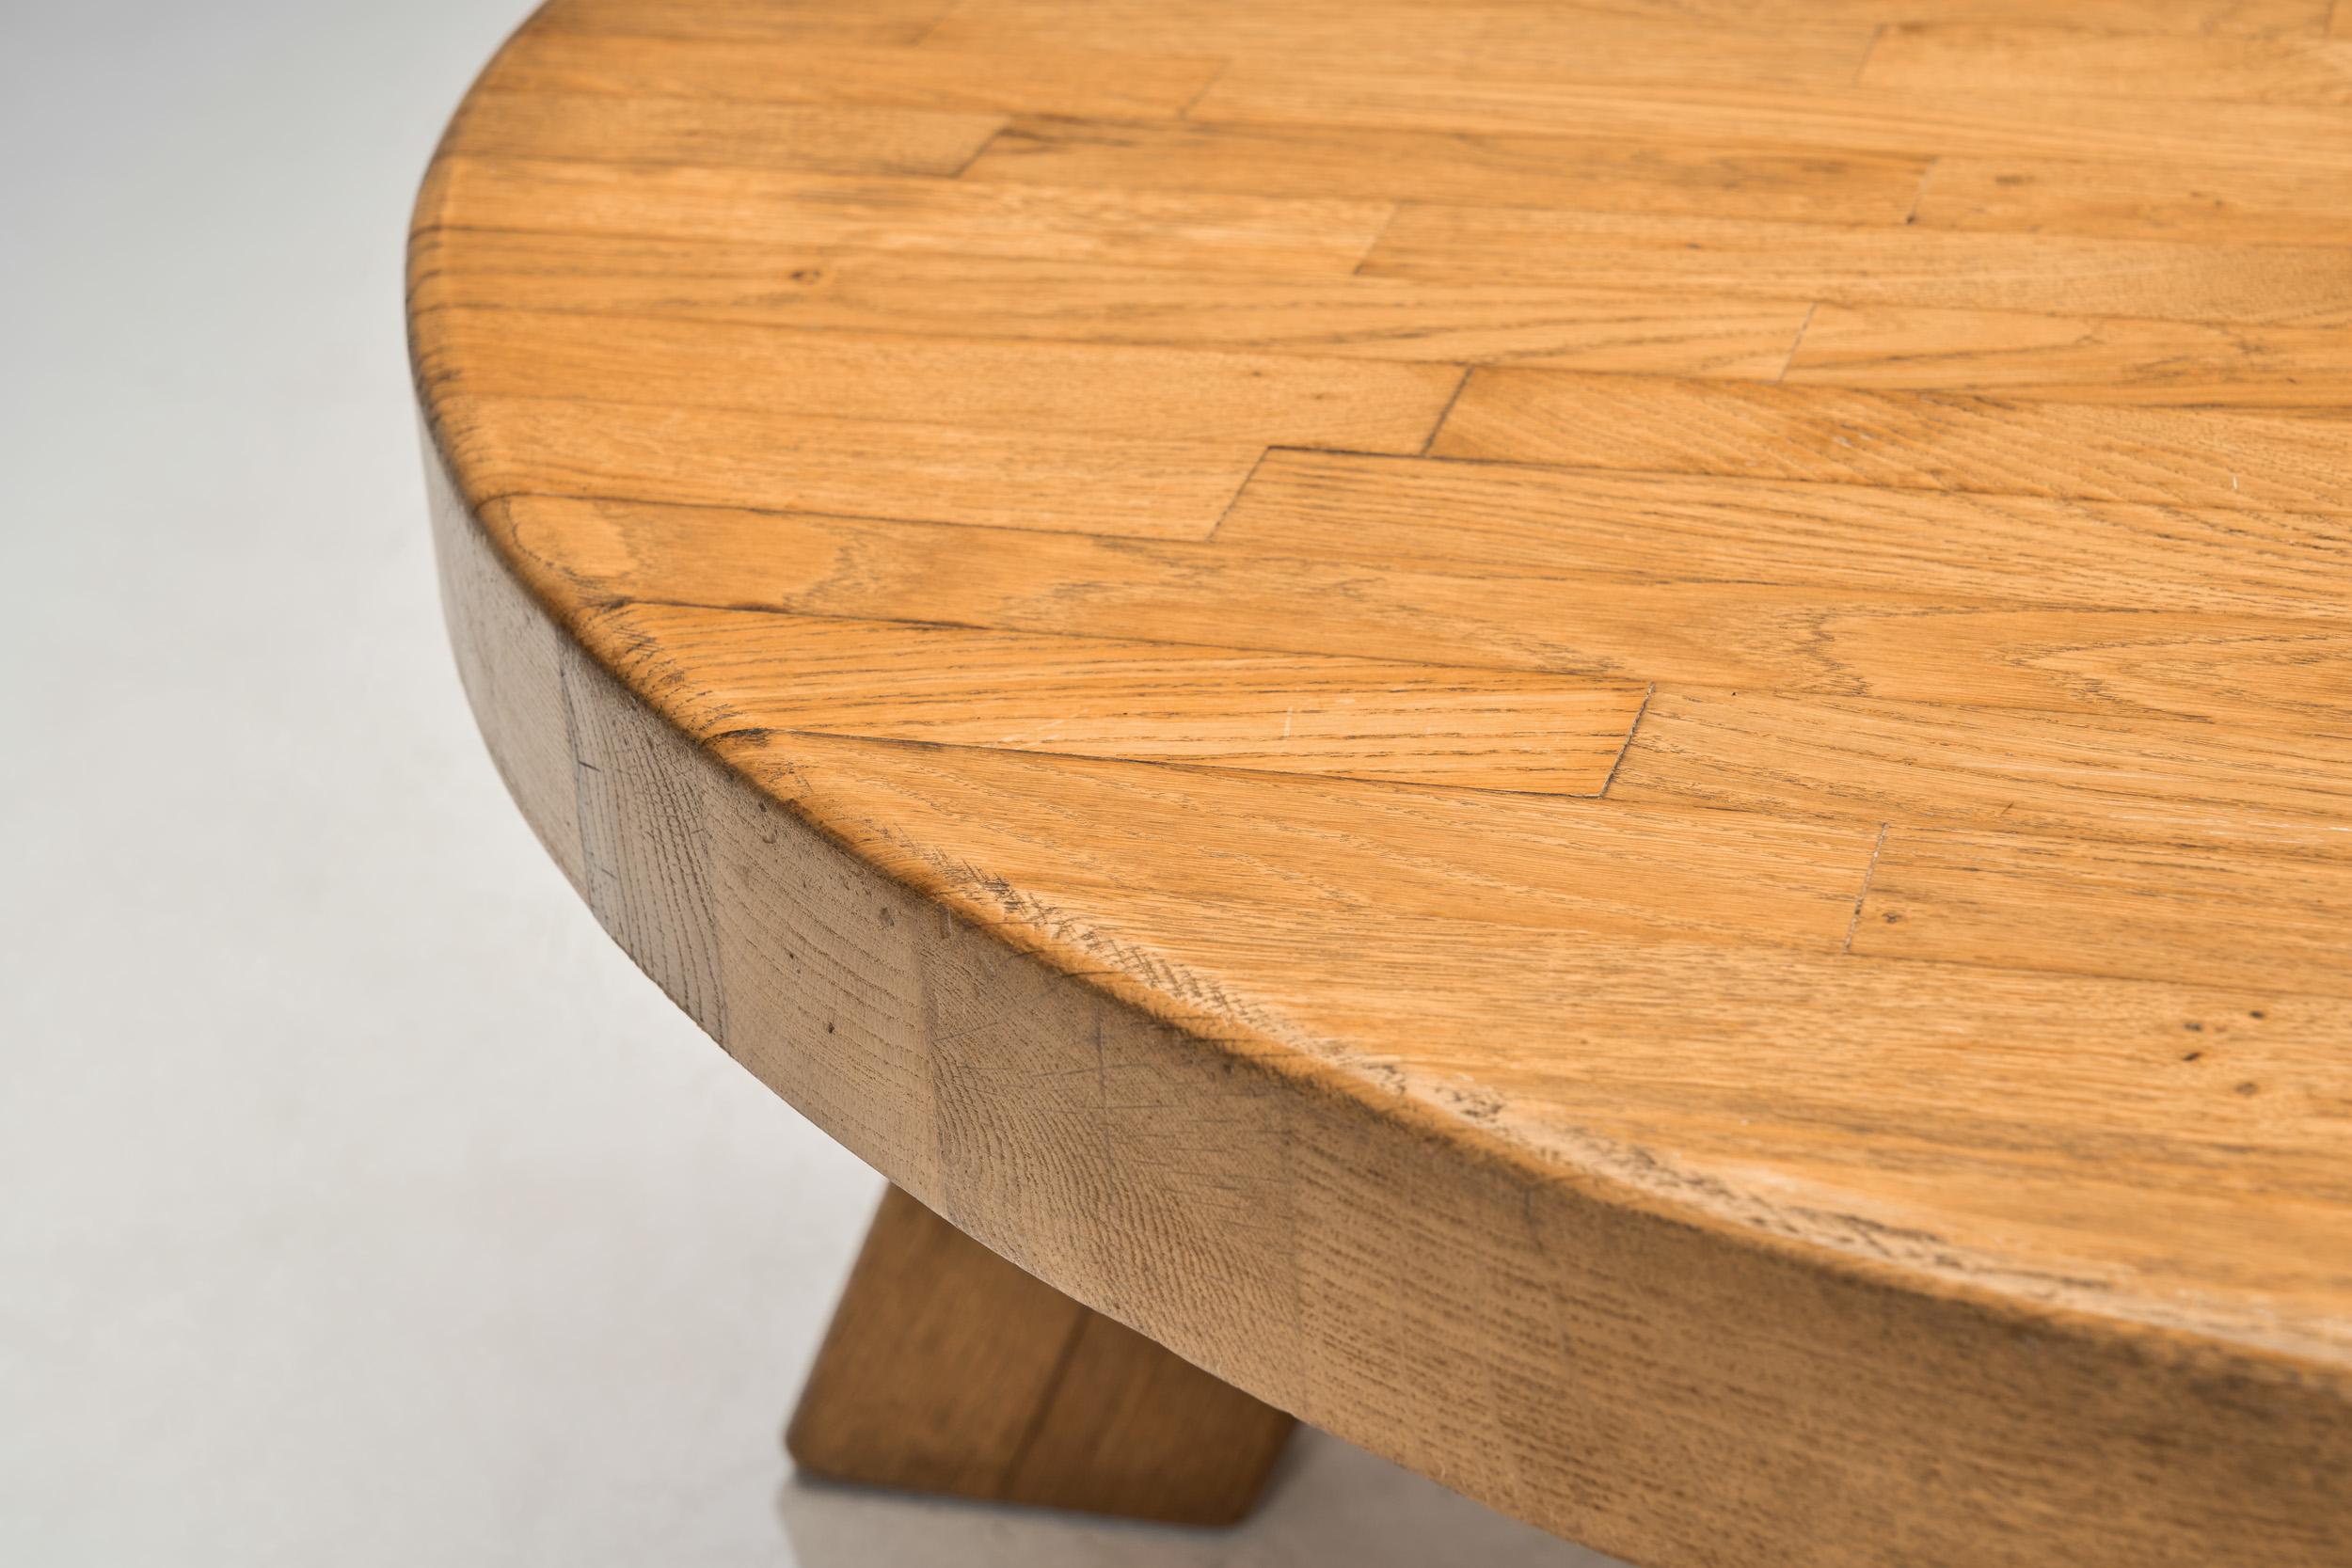 Solid Oak Round Brutalist Coffee Table, The Netherlands 1970s For Sale 2